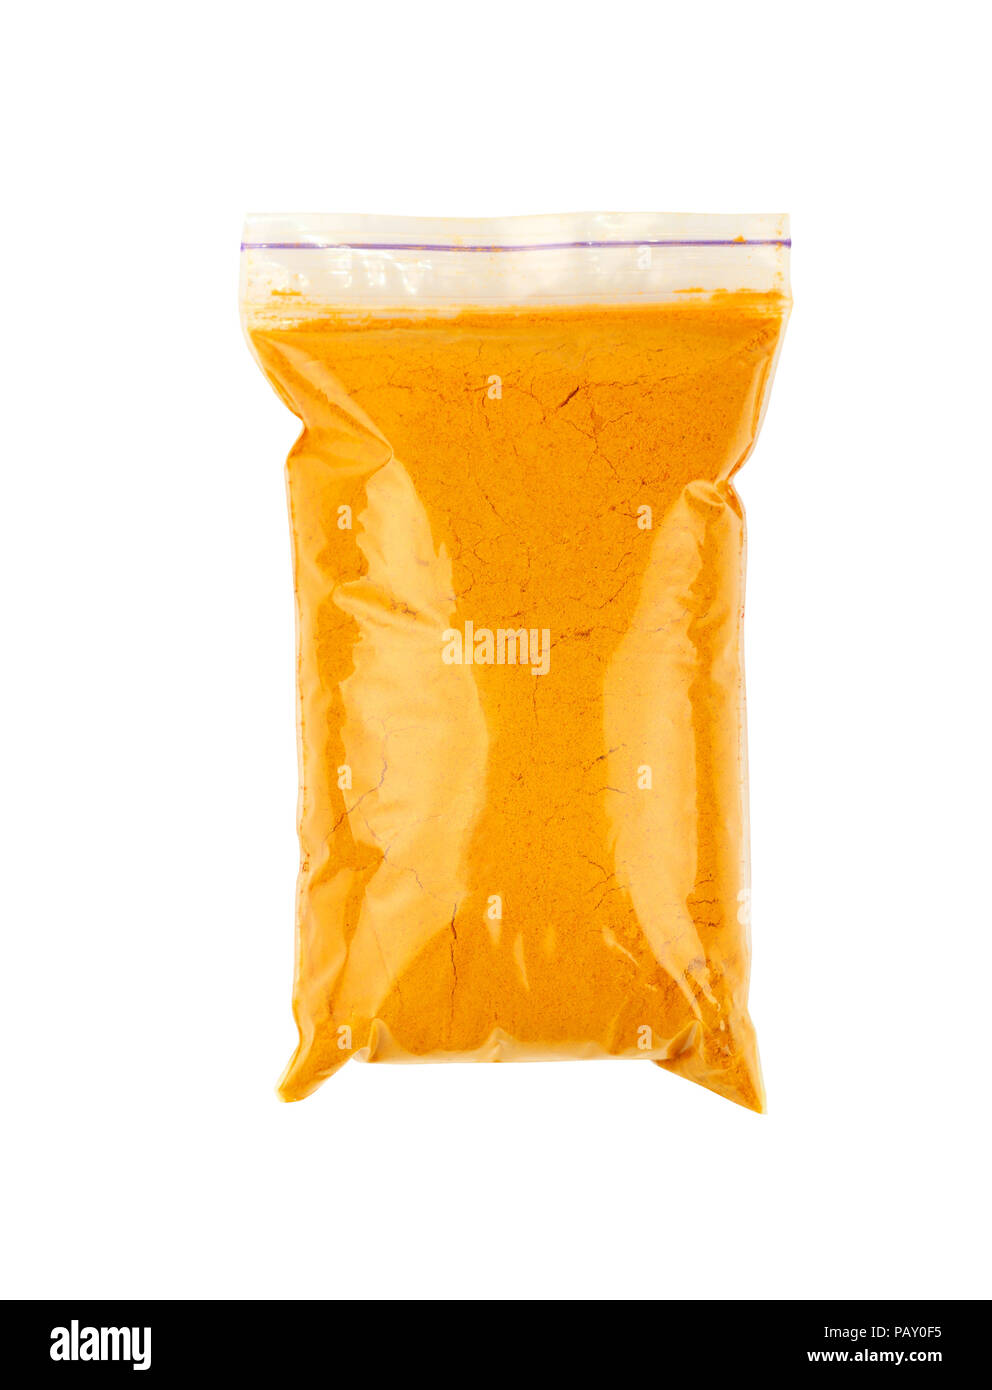 Download Close Up One Plastic Zip Lock Bag Full Of Yellow Turmeric Powder Spice Isolated On White Background Stock Photo Alamy Yellowimages Mockups